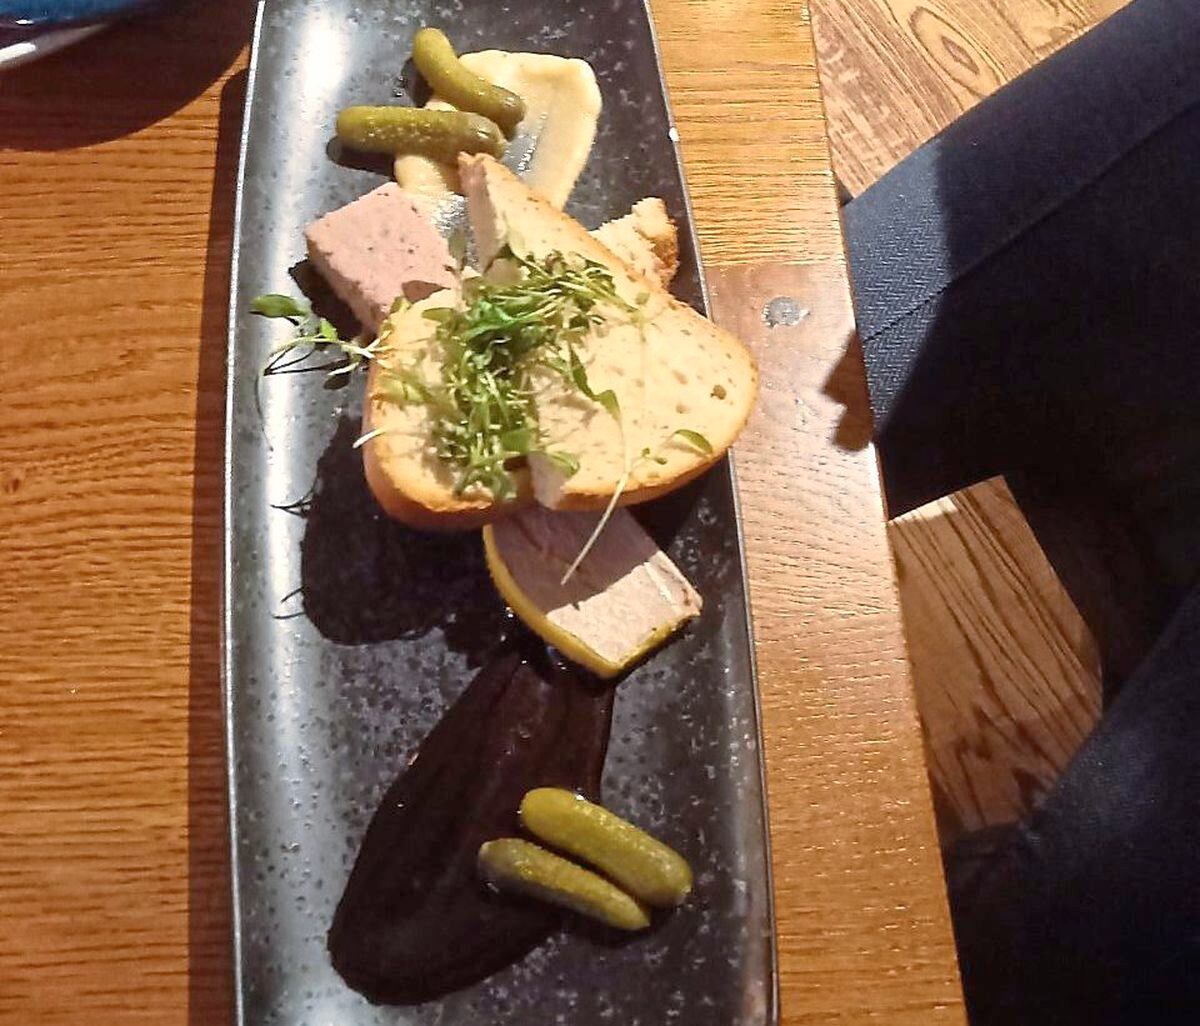 The duo of pâté with sourdough bread and gherkins